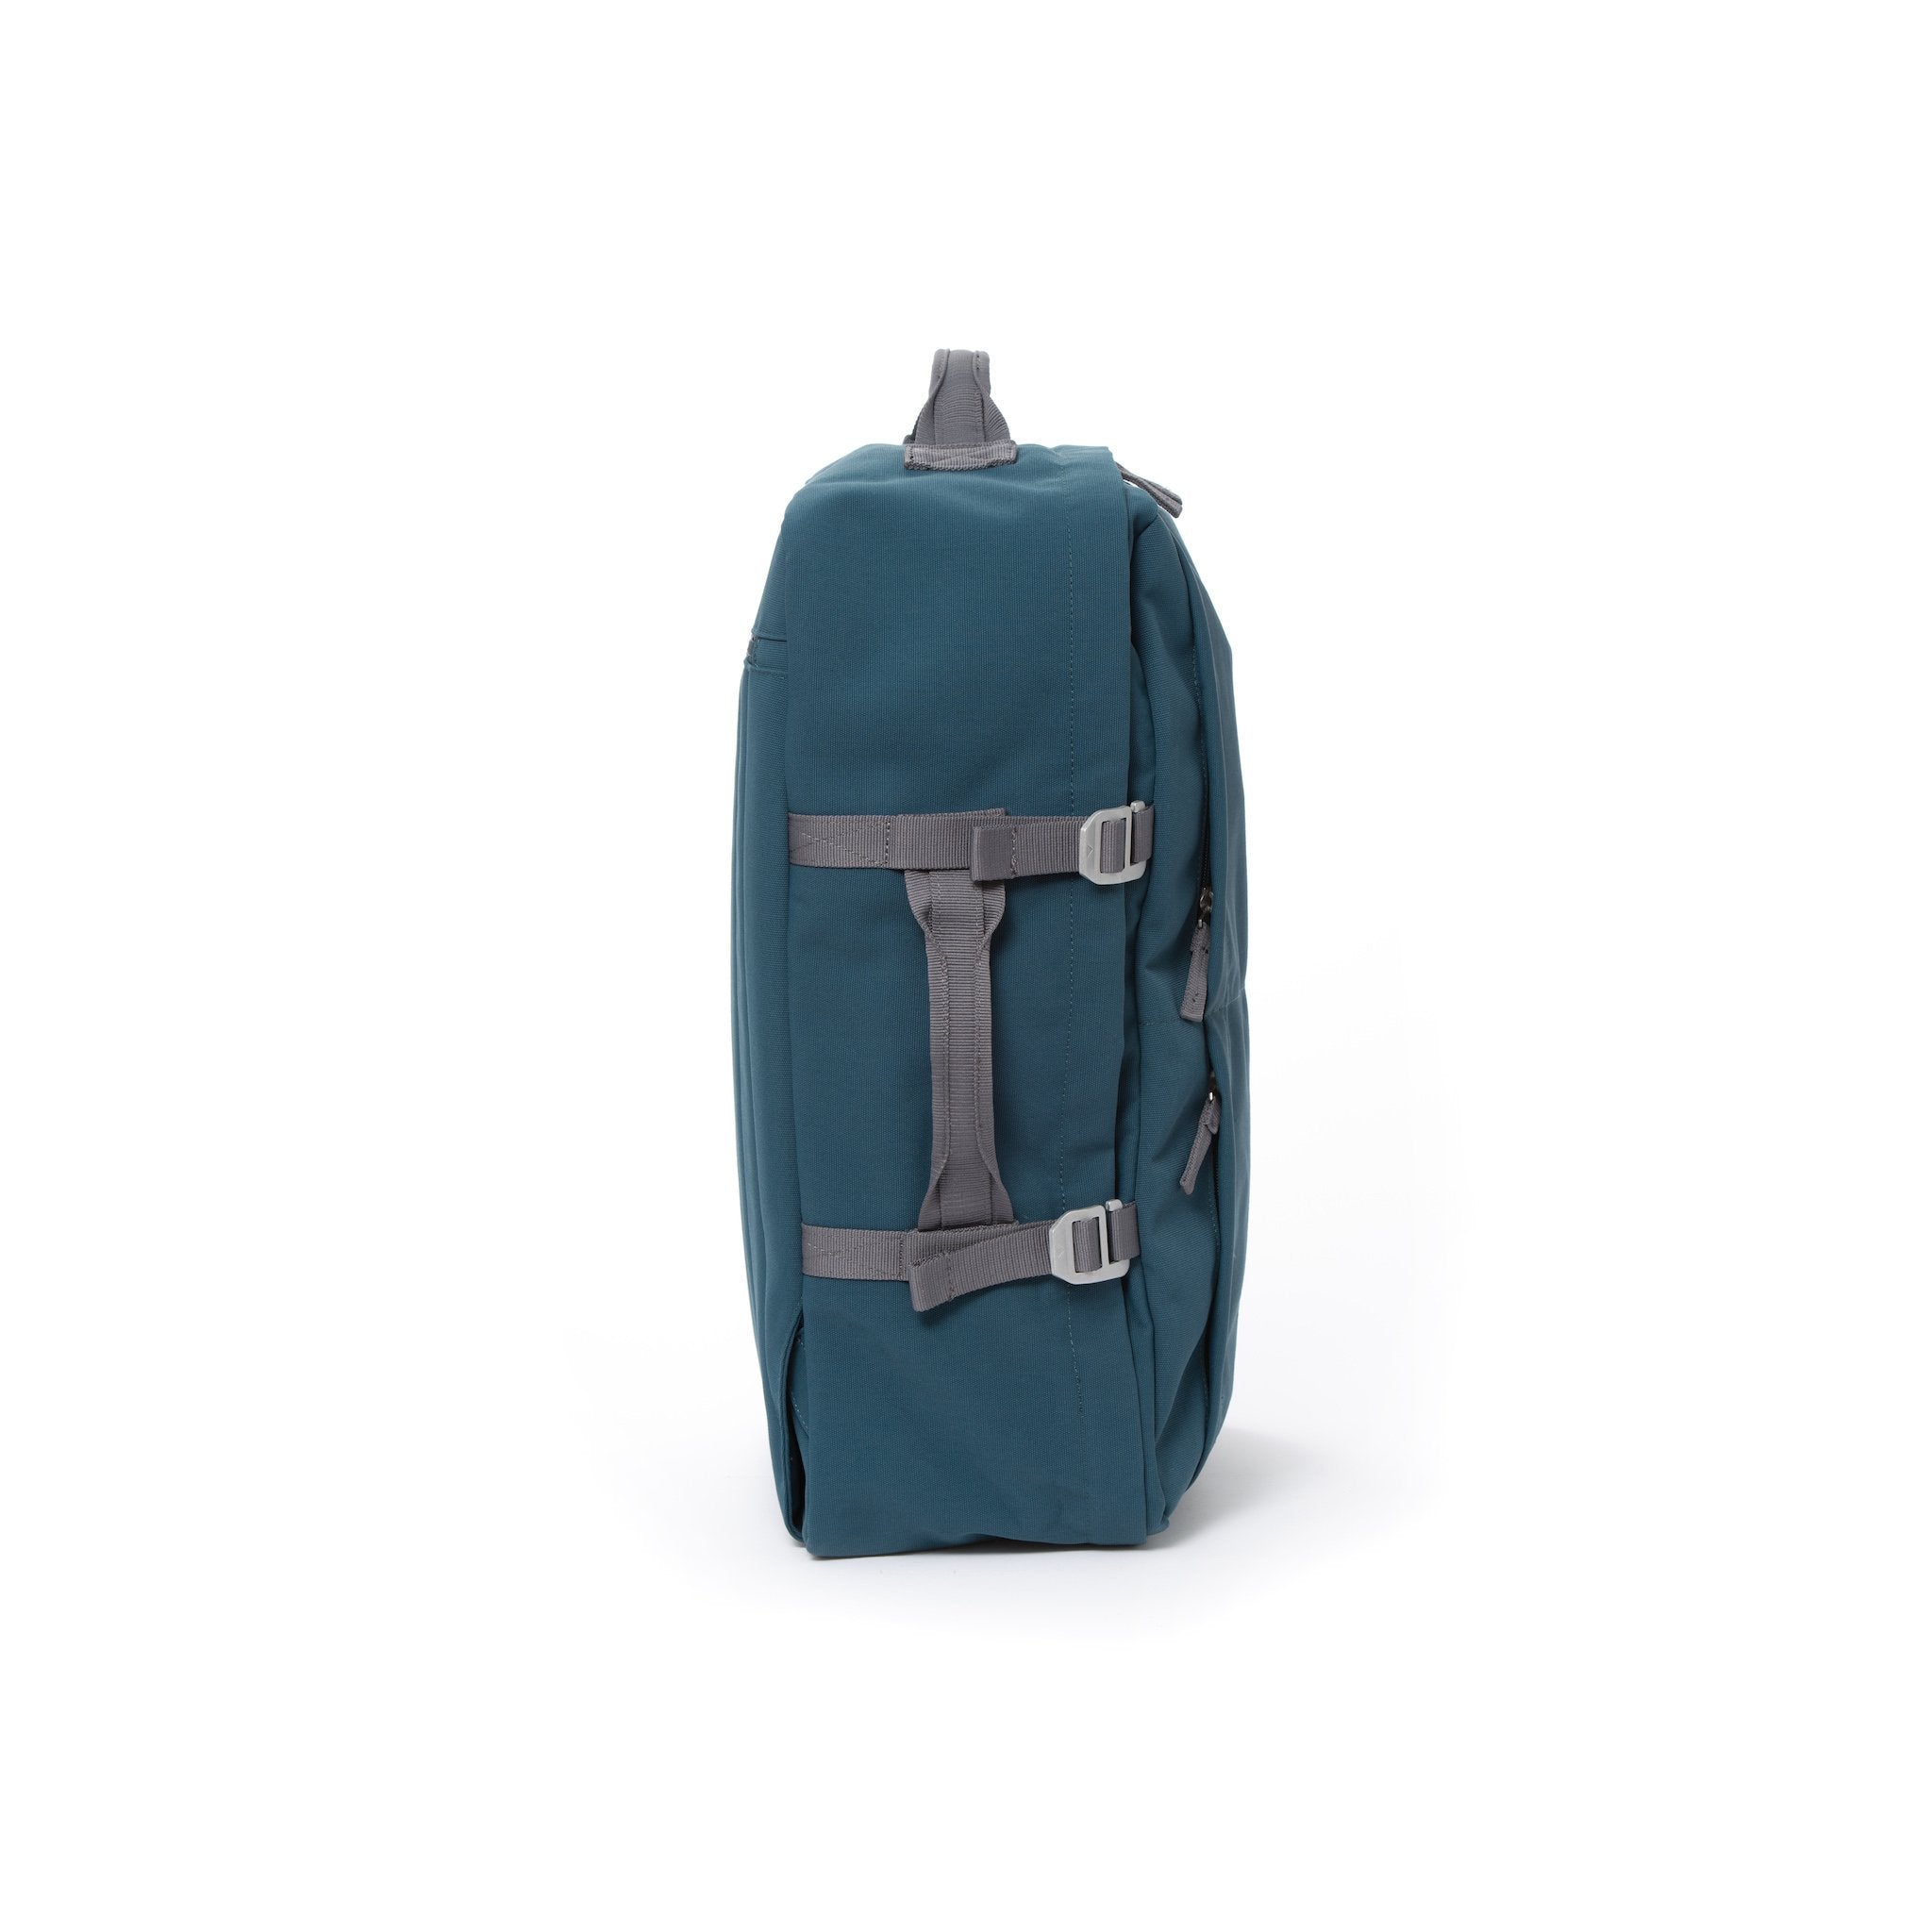 Blue recycled canvas travel backpack with compression side straps.